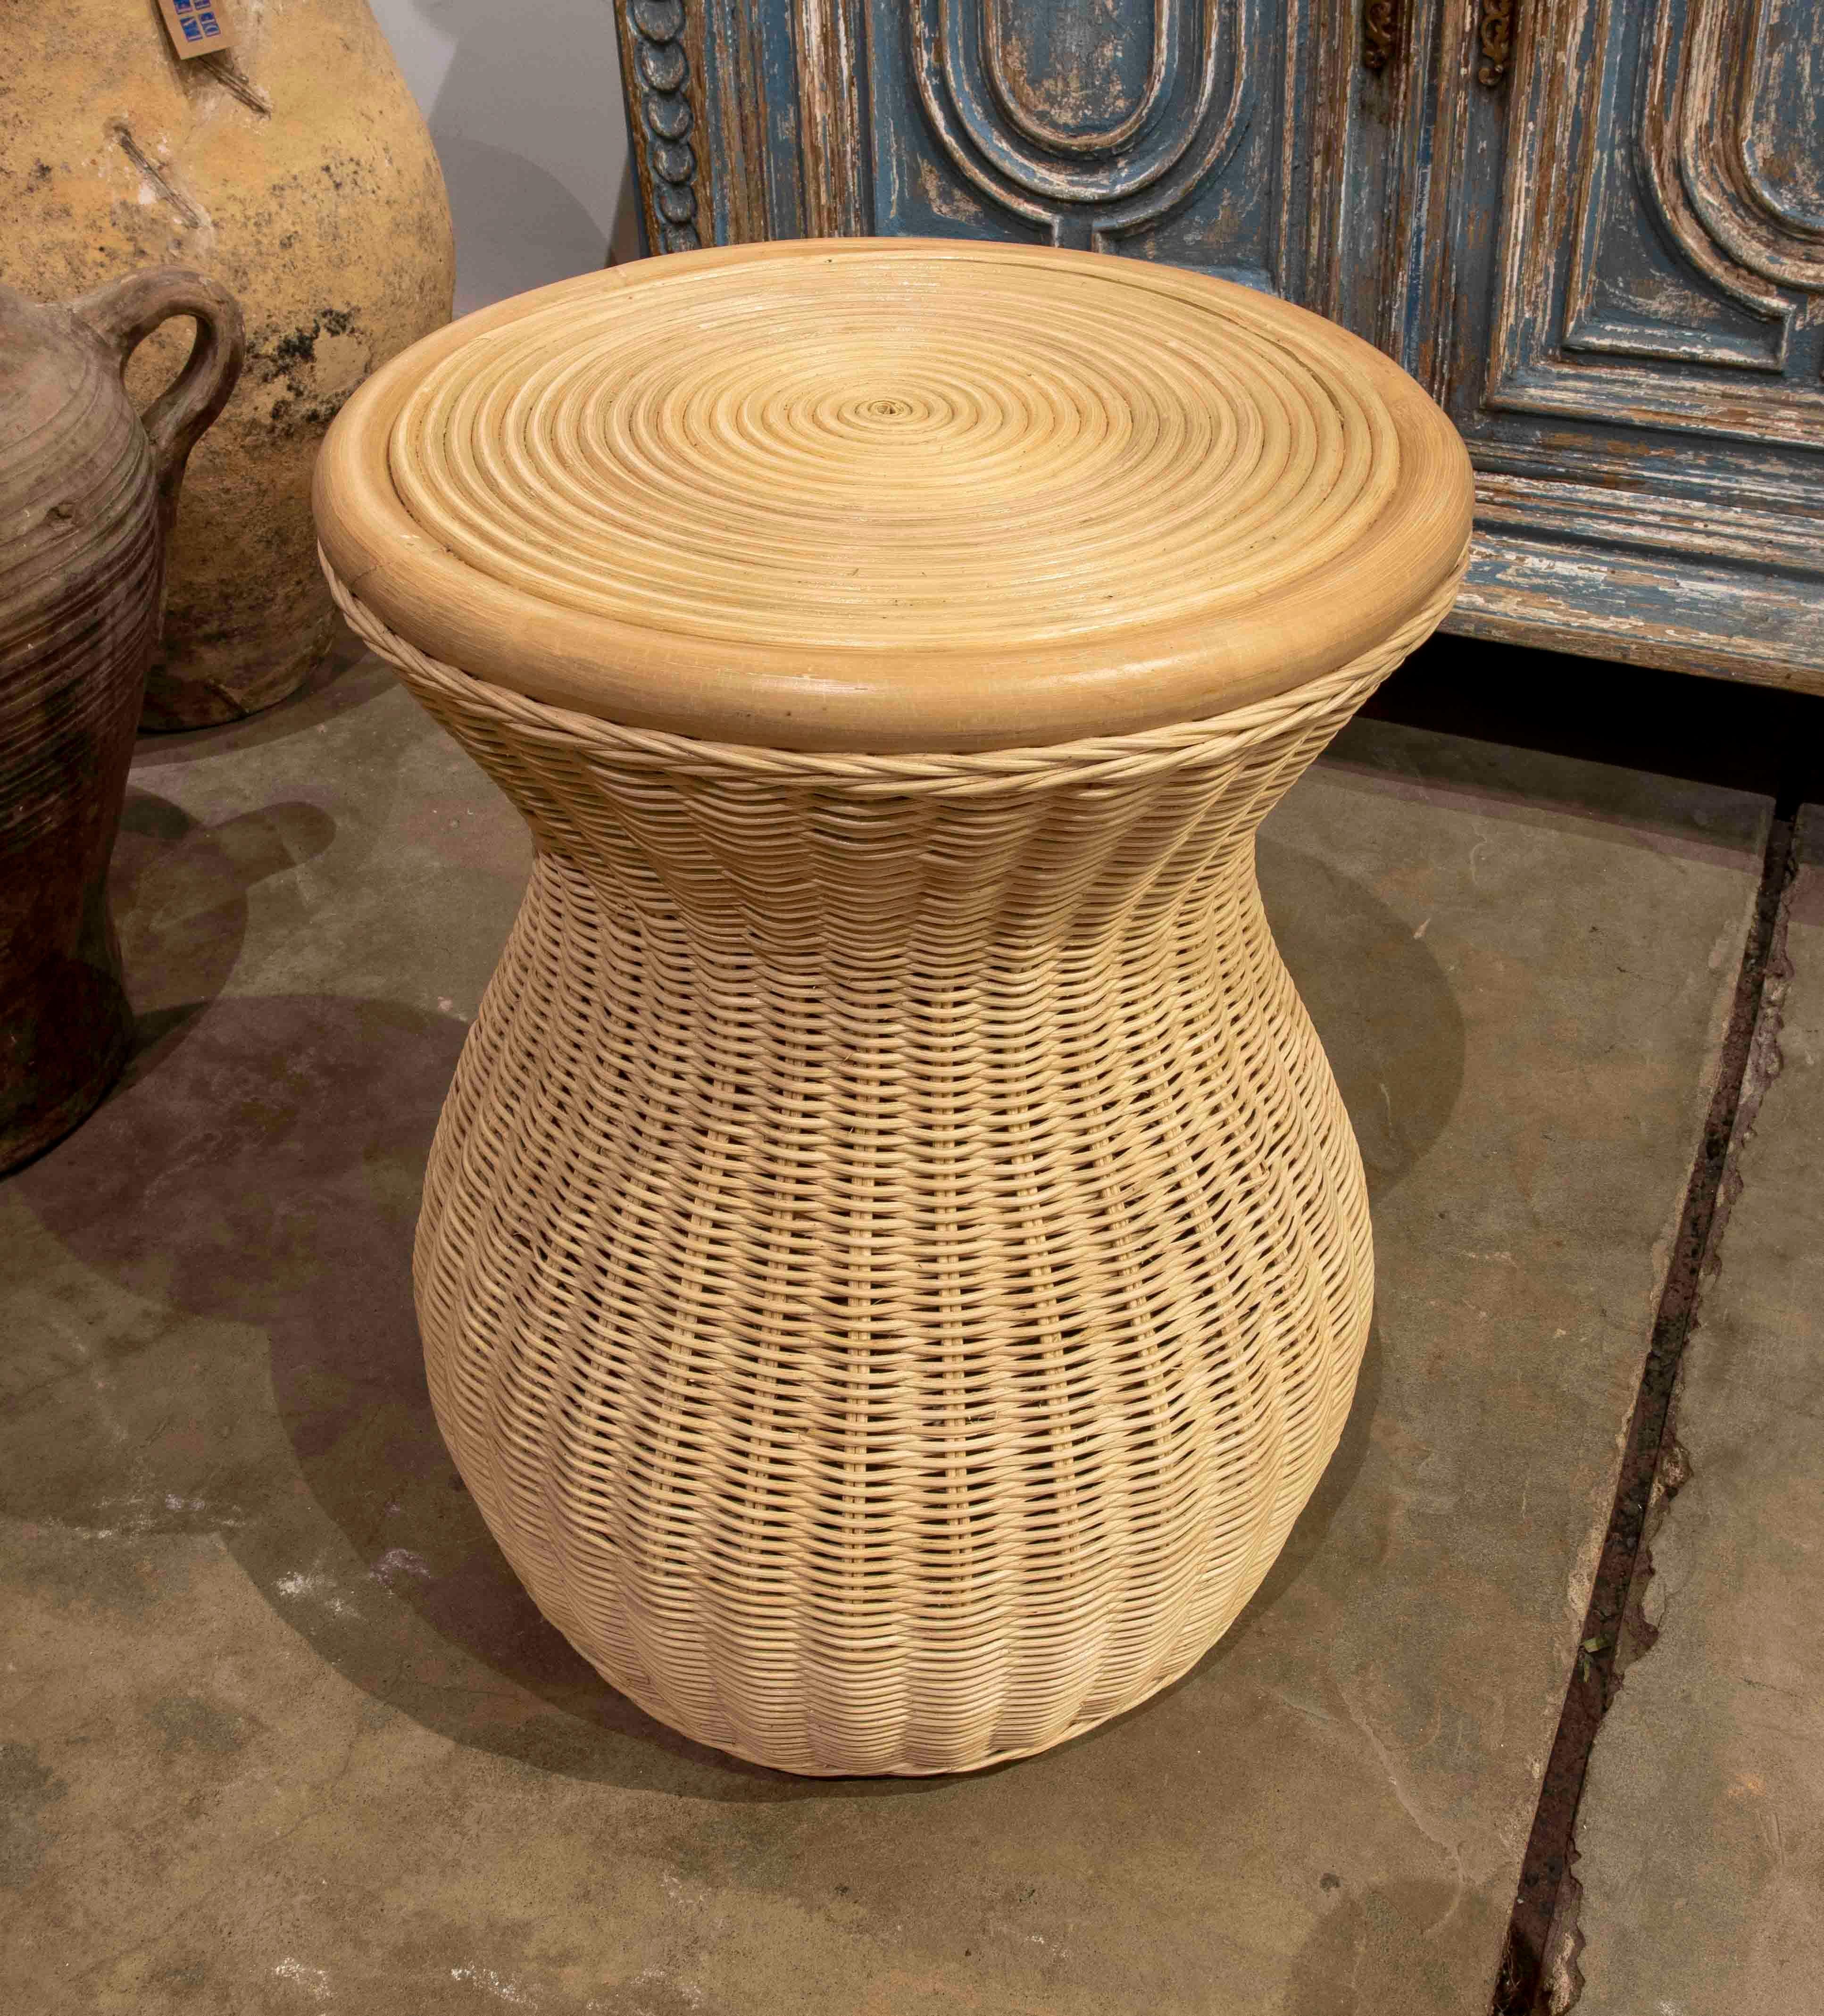 European Handmade Round Rattan and Wicker Stool For Sale